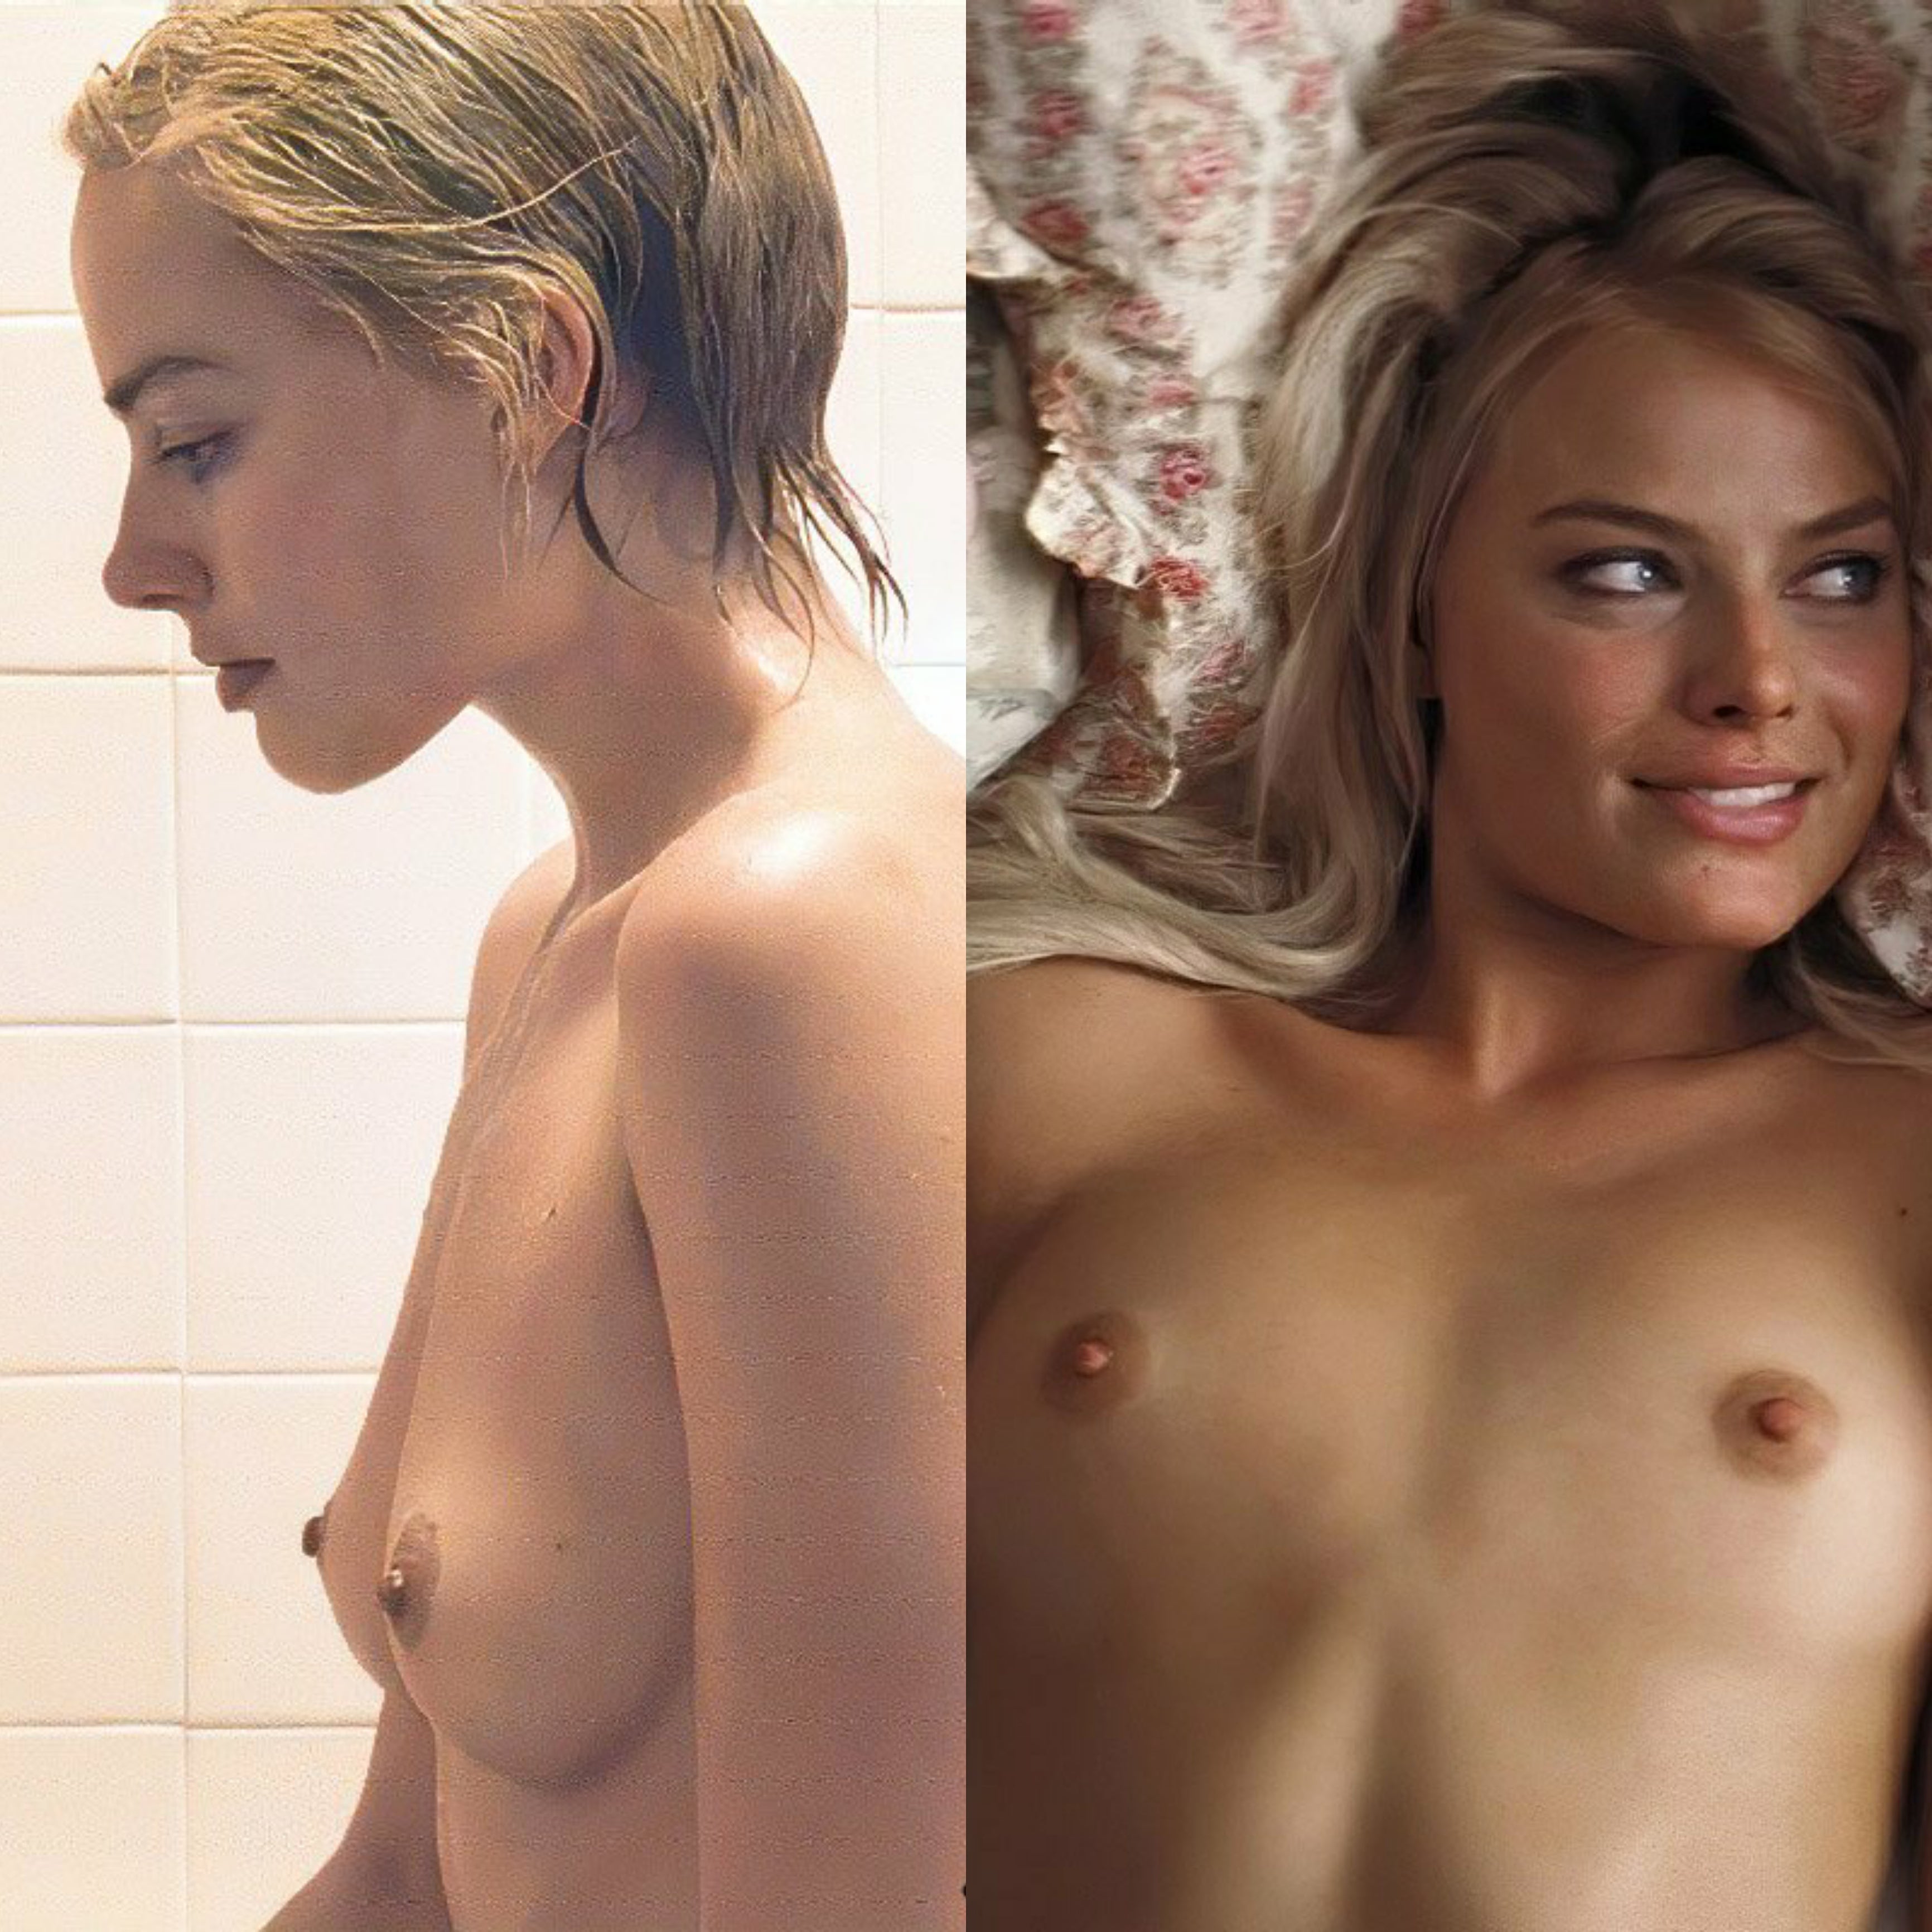 Margot Robbie And Her Perfect Areolas! on Porn imgur.